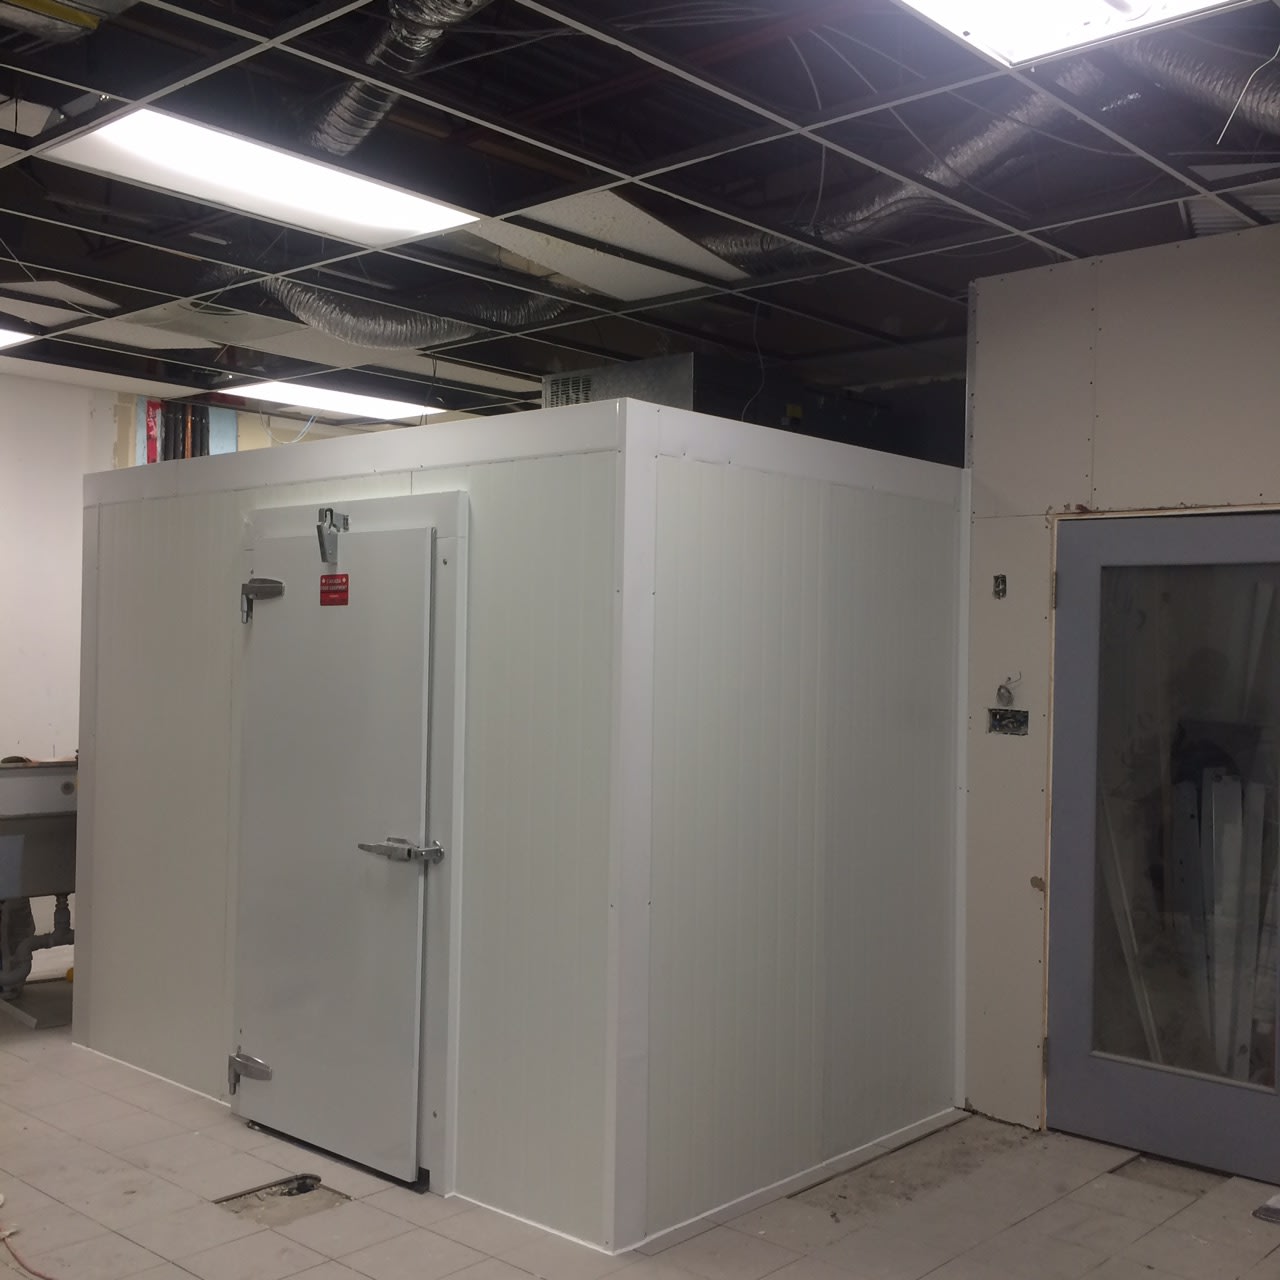 6x8x8H Walk-In Freezer - Self Contained (NEW) - F688SDNSC